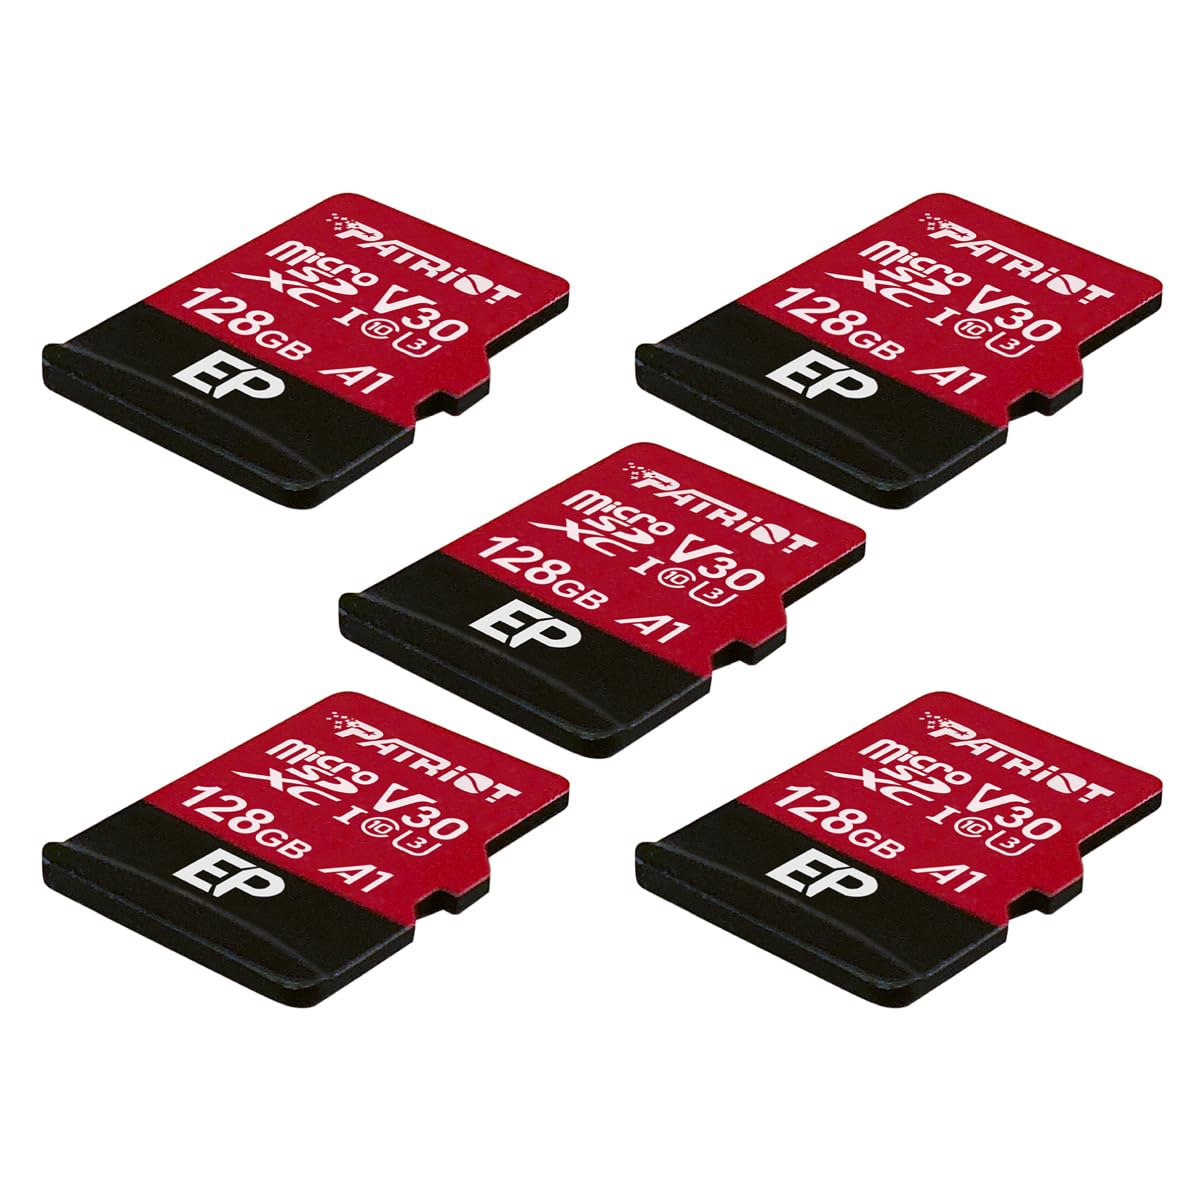 Patriot 128GB A1 / V30 Micro SD Card for Android Phones and Tablets, 4K Video Recording - 5 Pack, Lot of 5